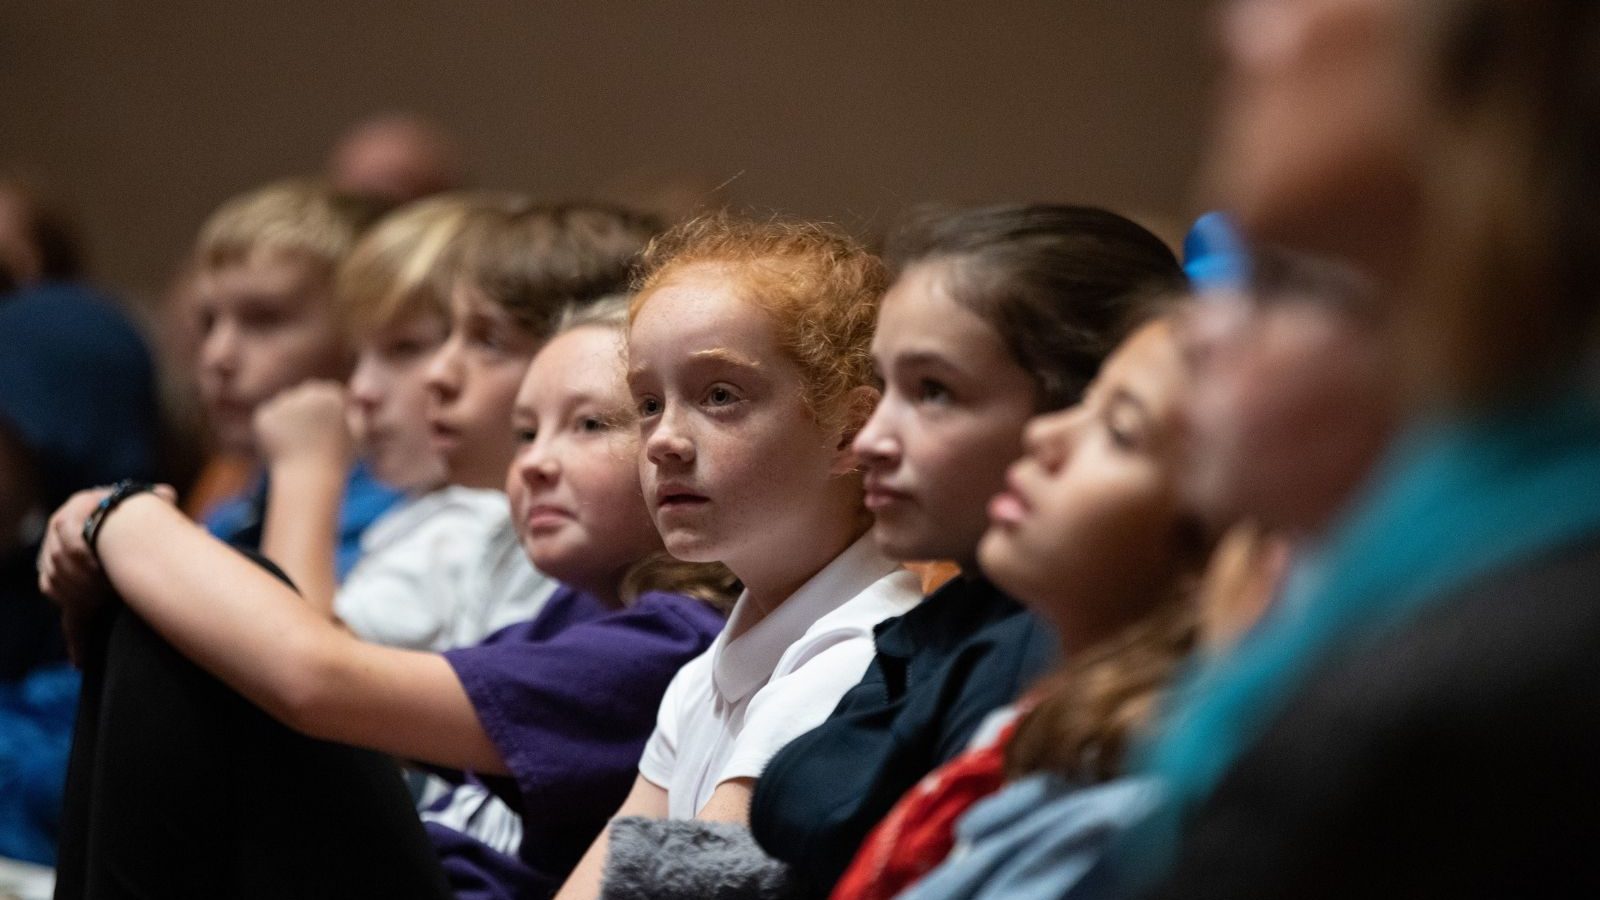 Students in the audience listening to a DSO concert